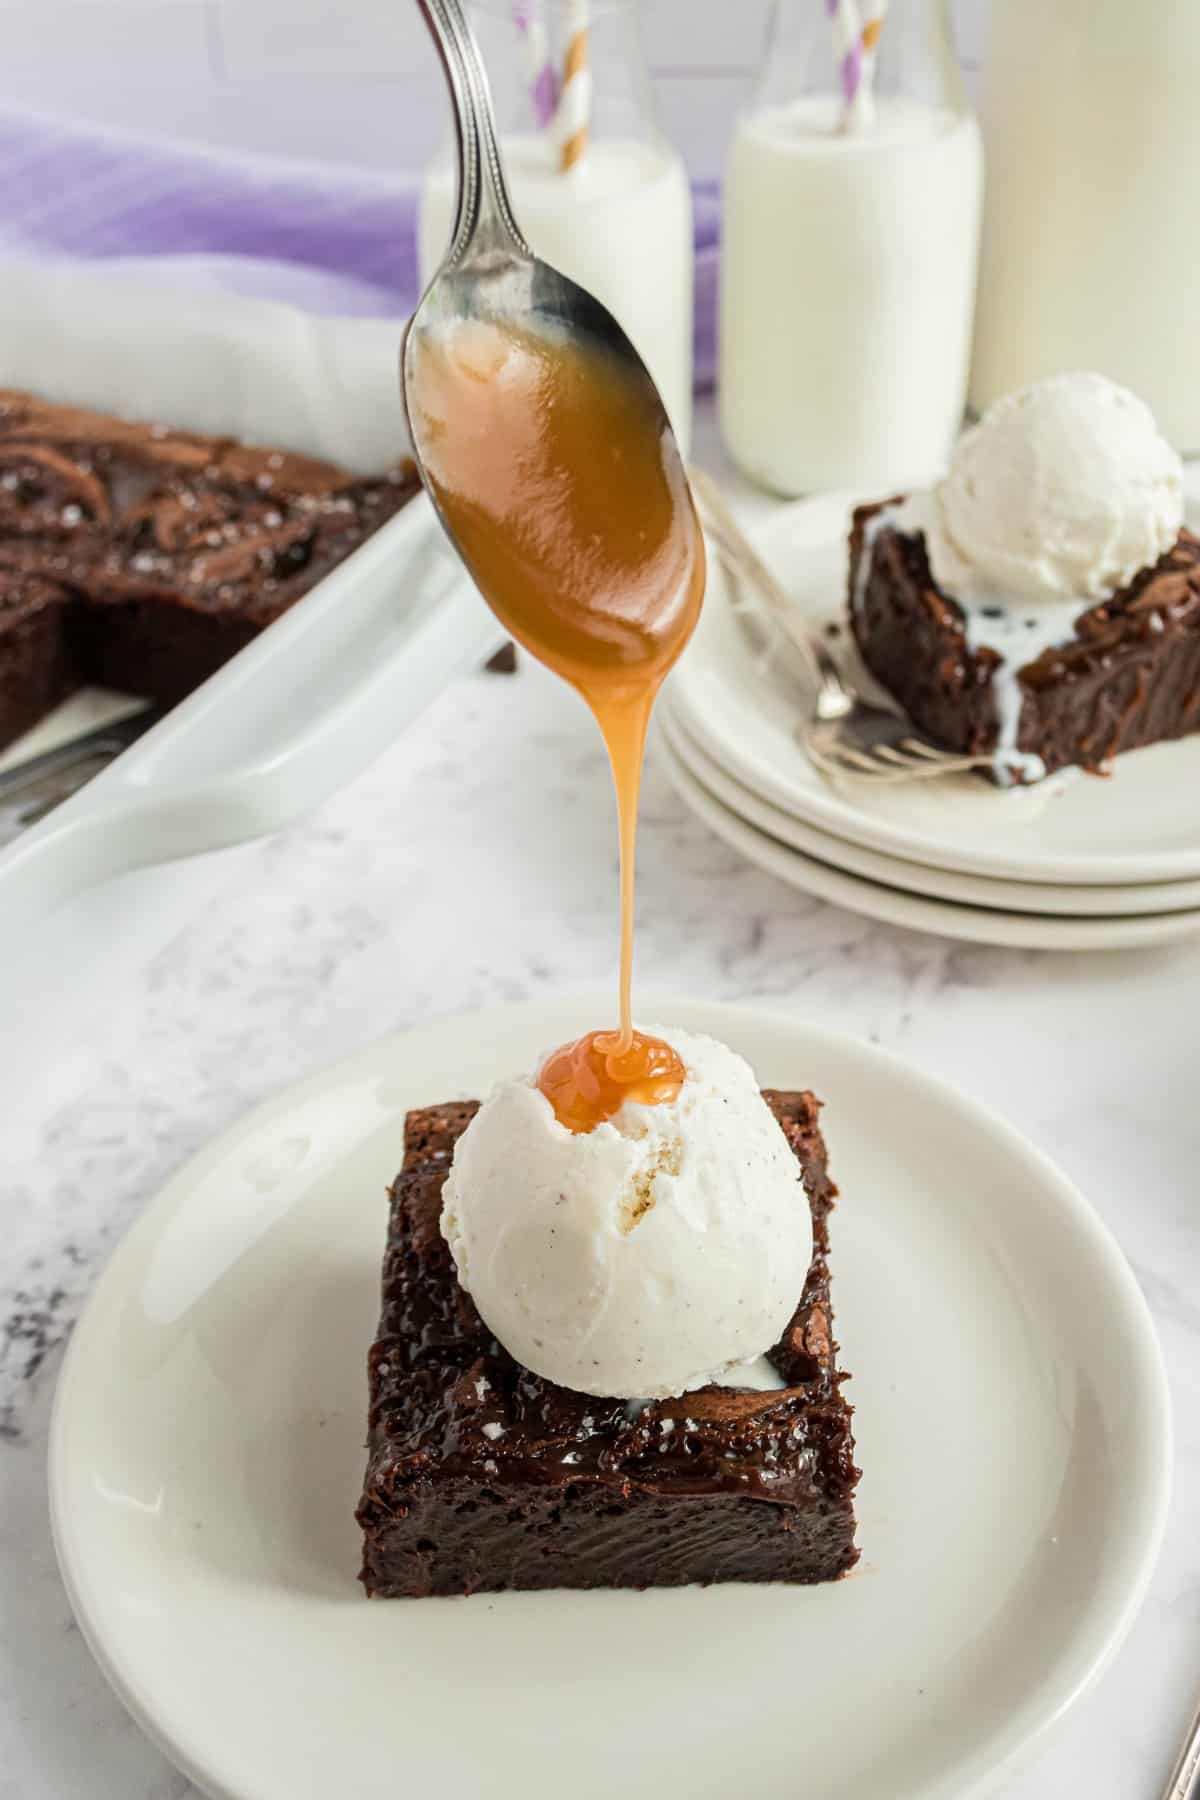 Brownie on a plate with caramel sauce being drizzled on ice cream.